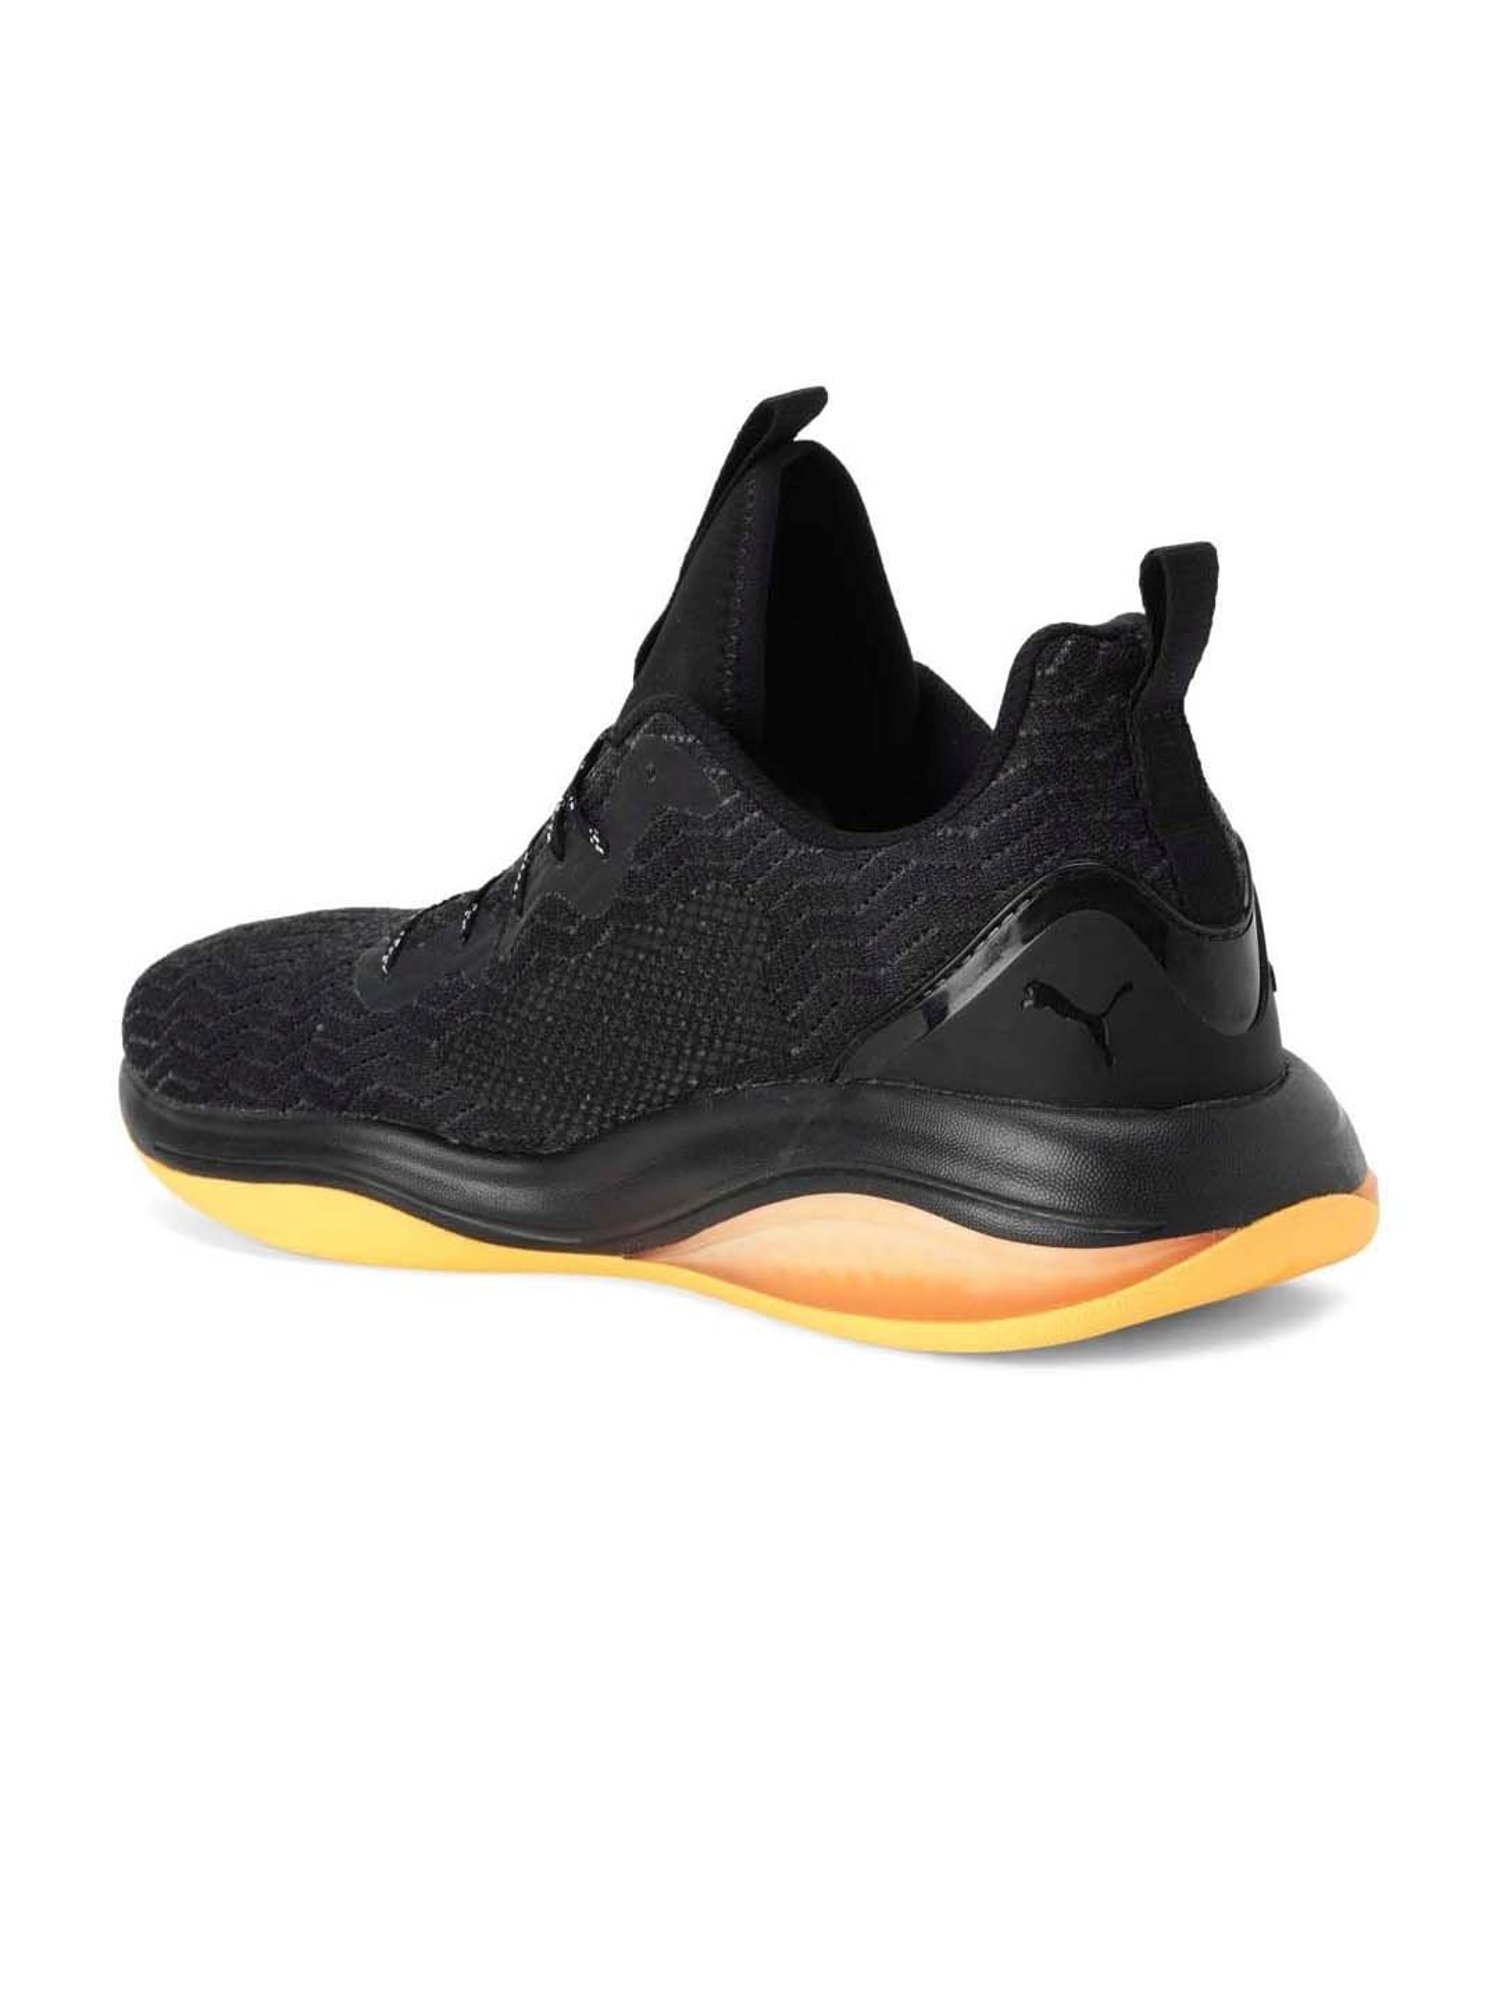 Permeabilidad No pretencioso Vatio Buy Puma LQDCELL Tension Rave Black Training Shoes from top Brands at Best  Prices Online in India | Tata CLiQ